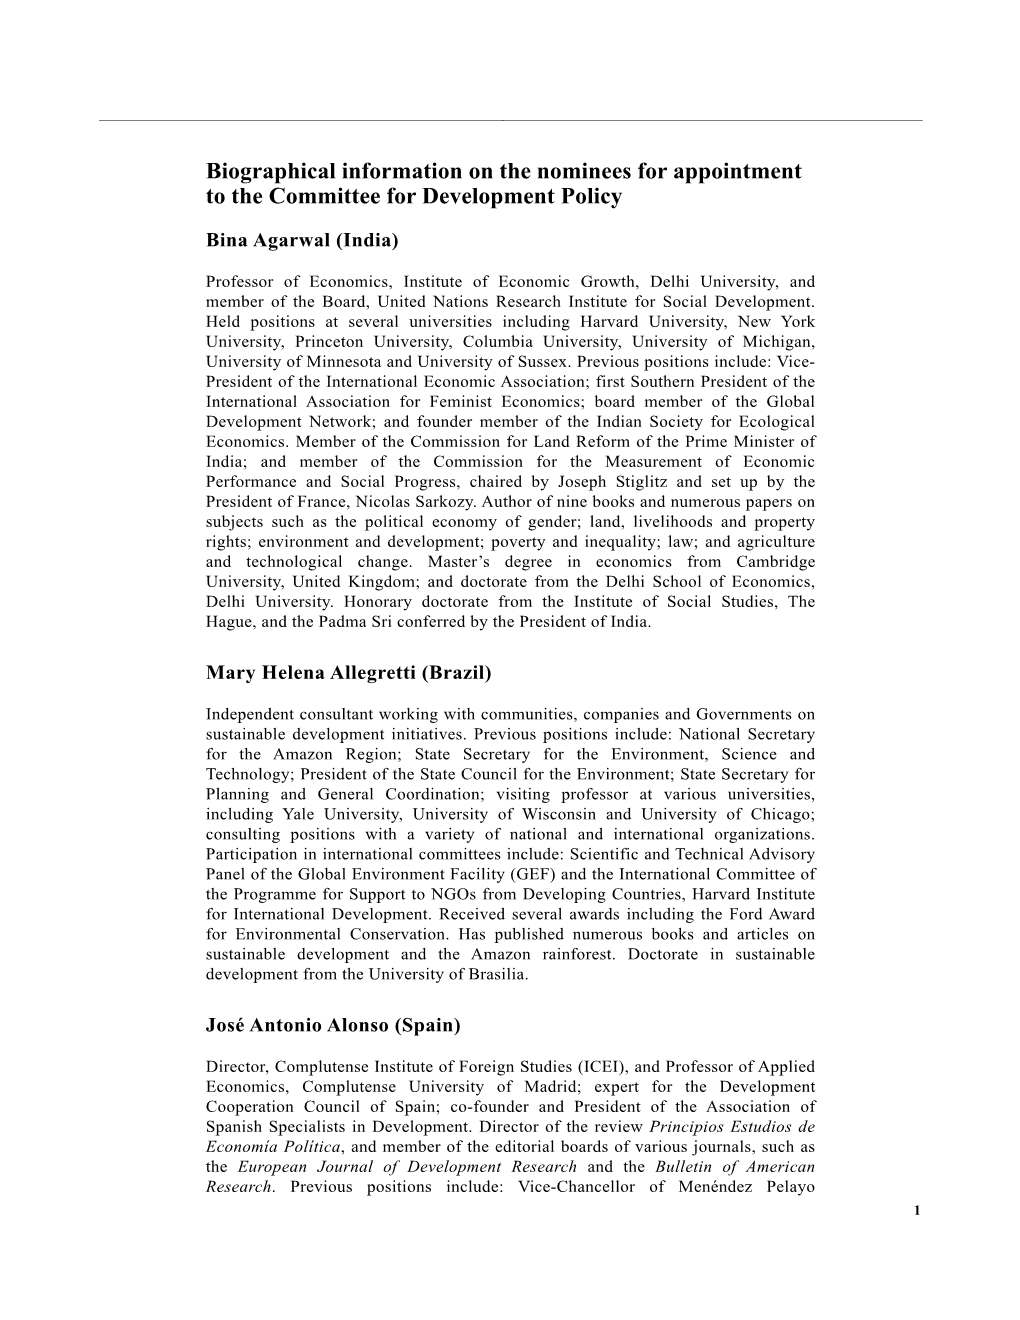 Biographical Information on the Nominees for Appointment to the Committee for Development Policy